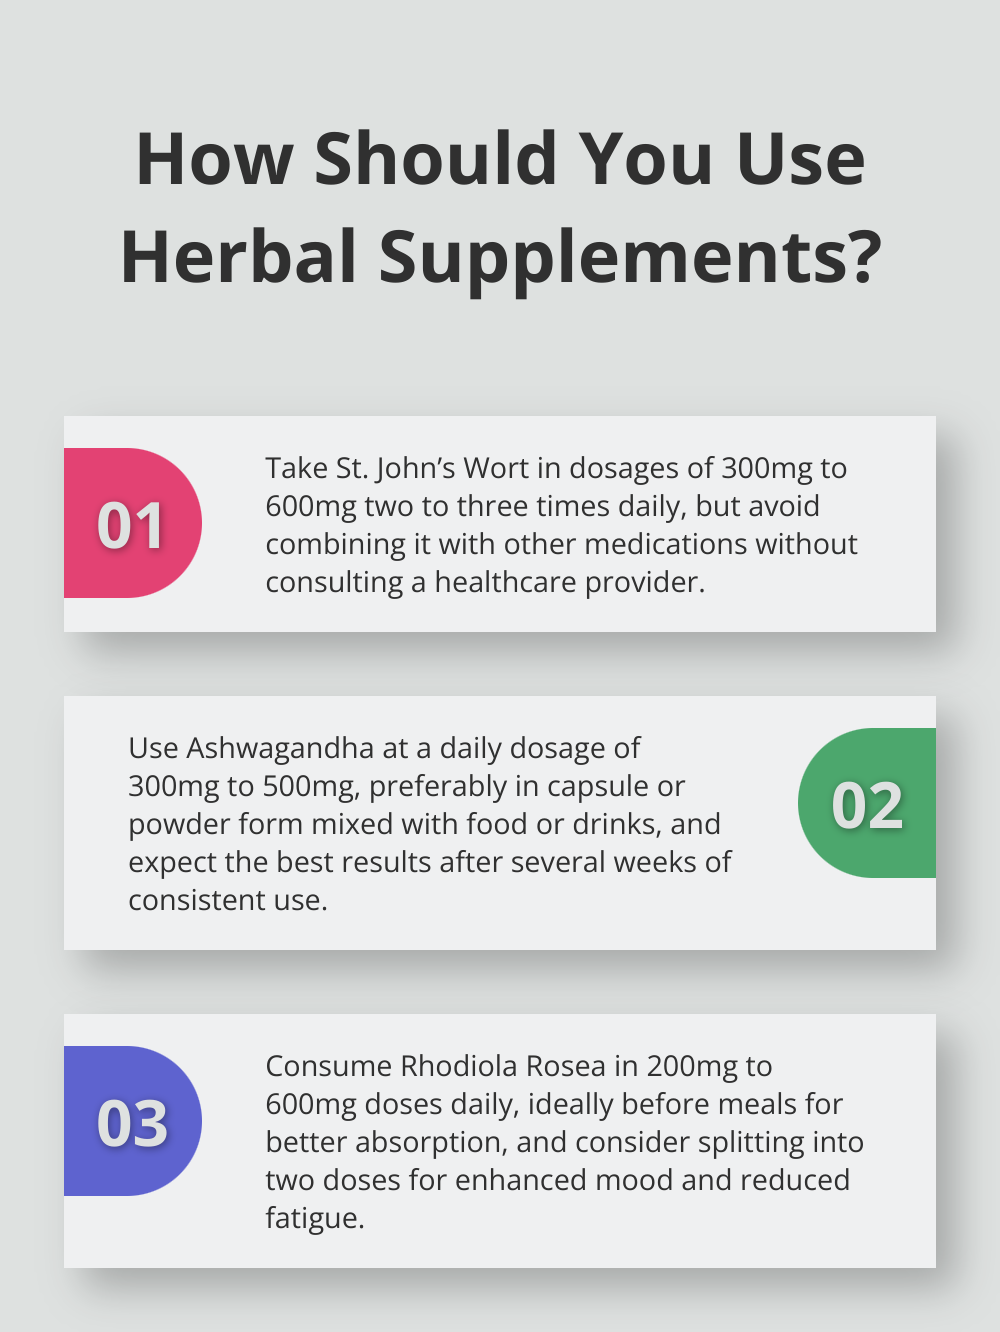 Fact - How Should You Use Herbal Supplements?